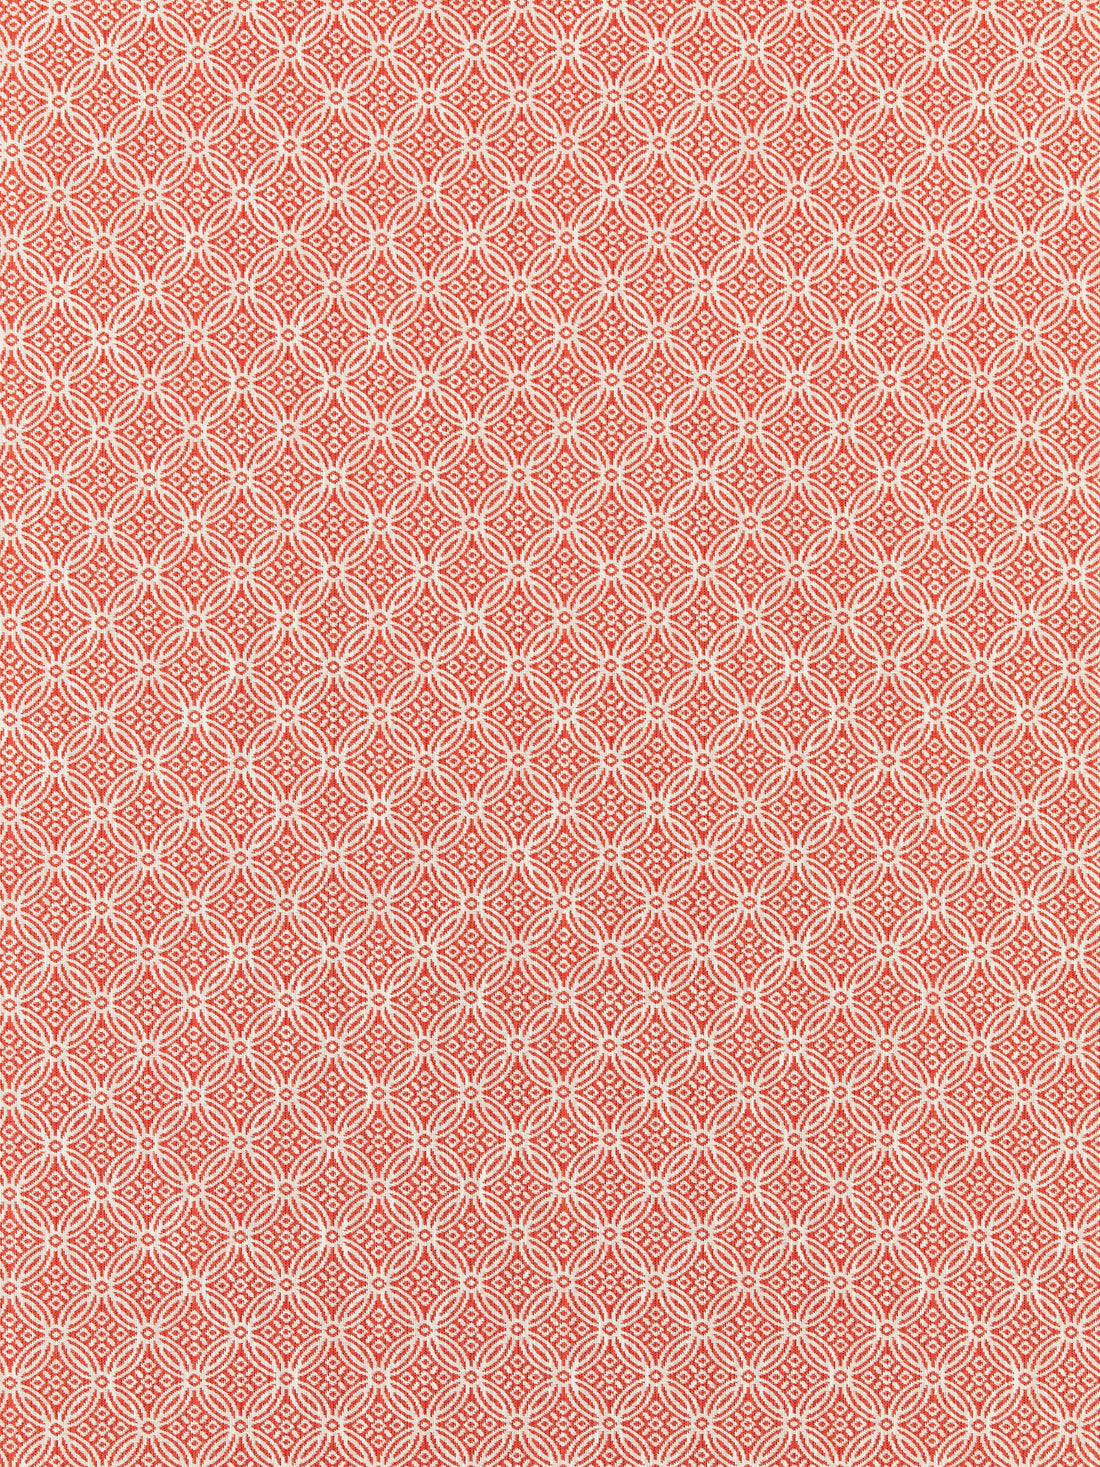 Cape May fabric in cherry color - pattern number SC 000327317 - by Scalamandre in the Scalamandre Fabrics Book 1 collection